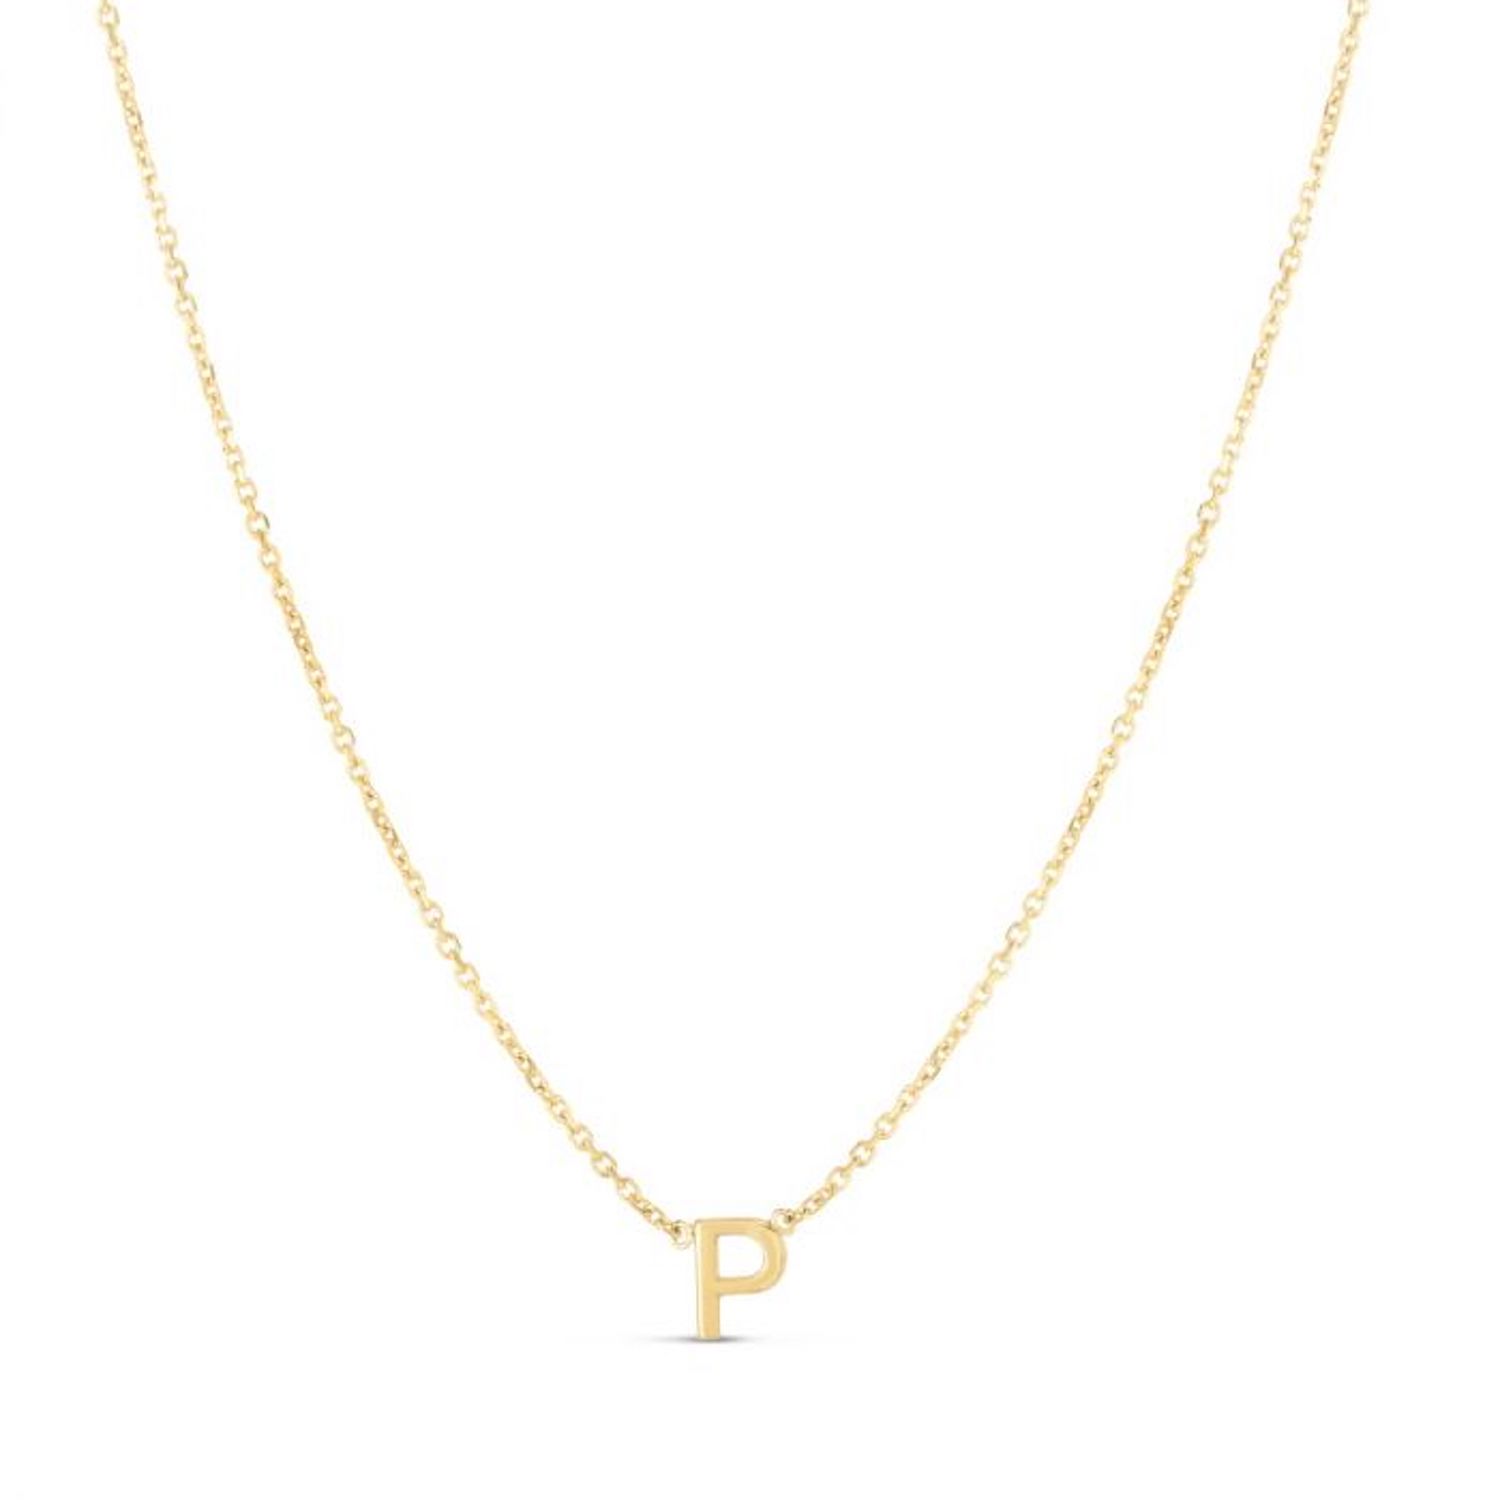 14K Yellow Gold Letter Initials Pendant Necklace 16"-18" - P